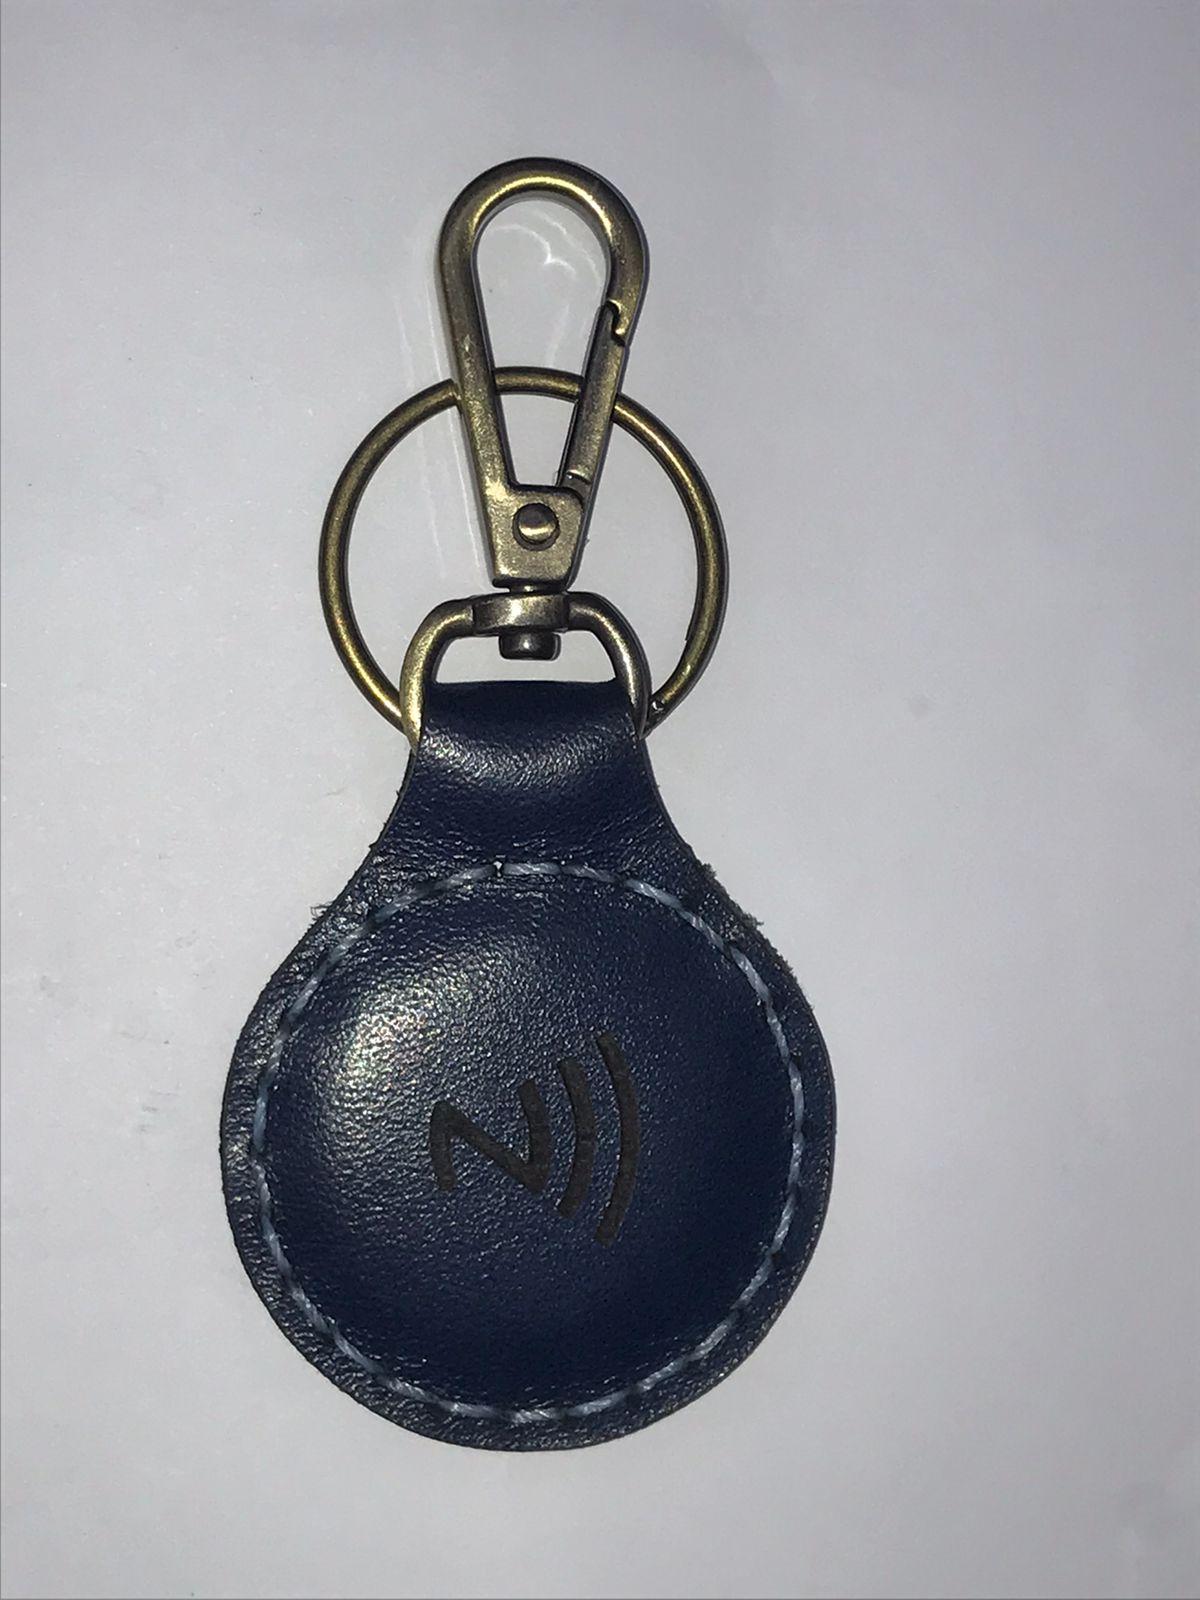 NFC Egypt Keychain - Share Everything Handmade Natural Leather (Blue) Chip Model 215